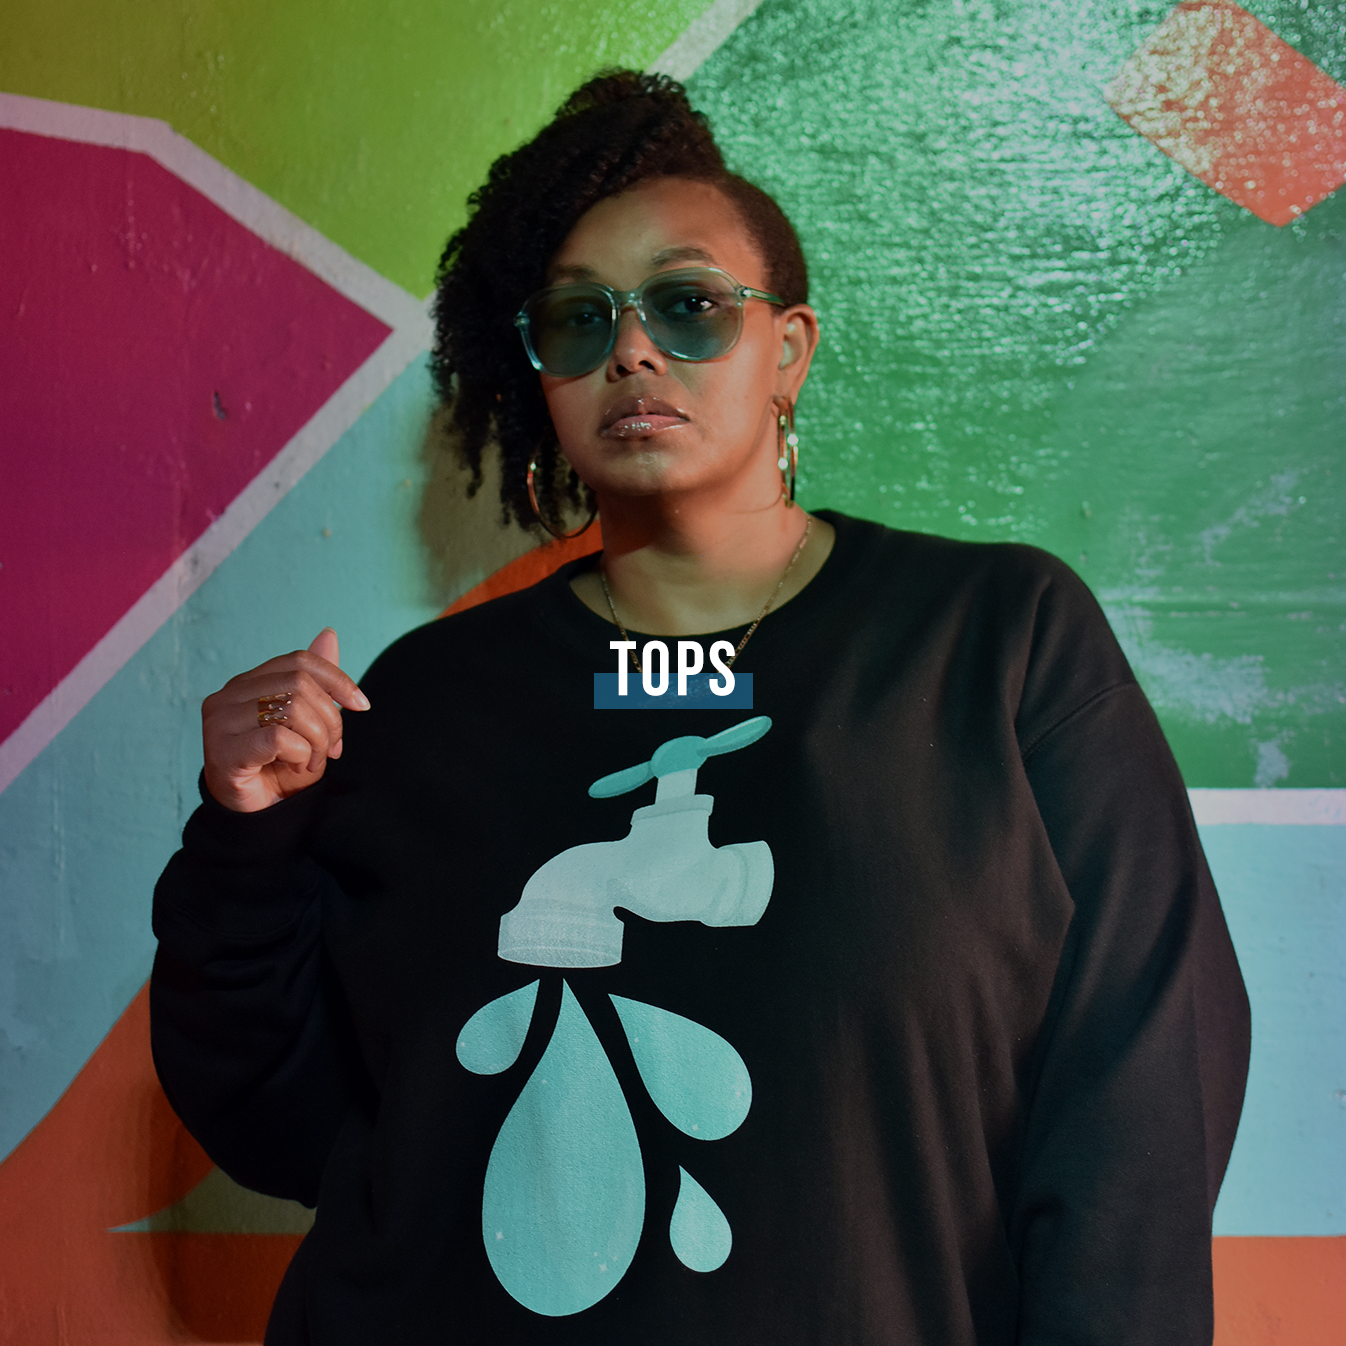 Waist up shot of a Black woman wearing the 1550 Brand Big Drip Champion sweatshirt, which features an illustrated image of a faucet with large drops of water falling from it. Her hair is curly and piled on one side and she is wearing turquoise sunglasses to match the image on the sweatshirt.